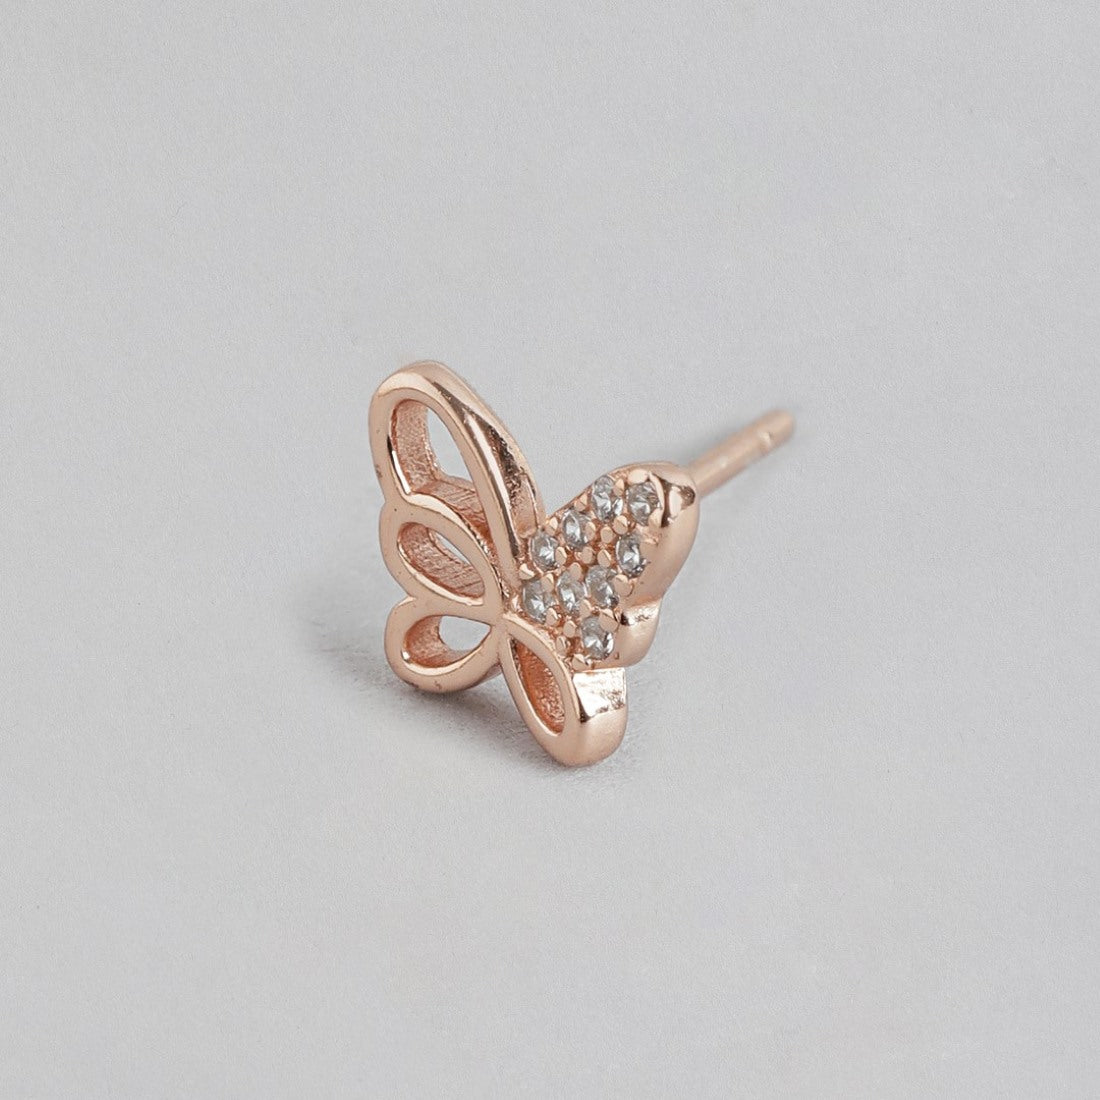 Butterfly Blush Rose Gold-Plated 925 Sterling Silver Earrings